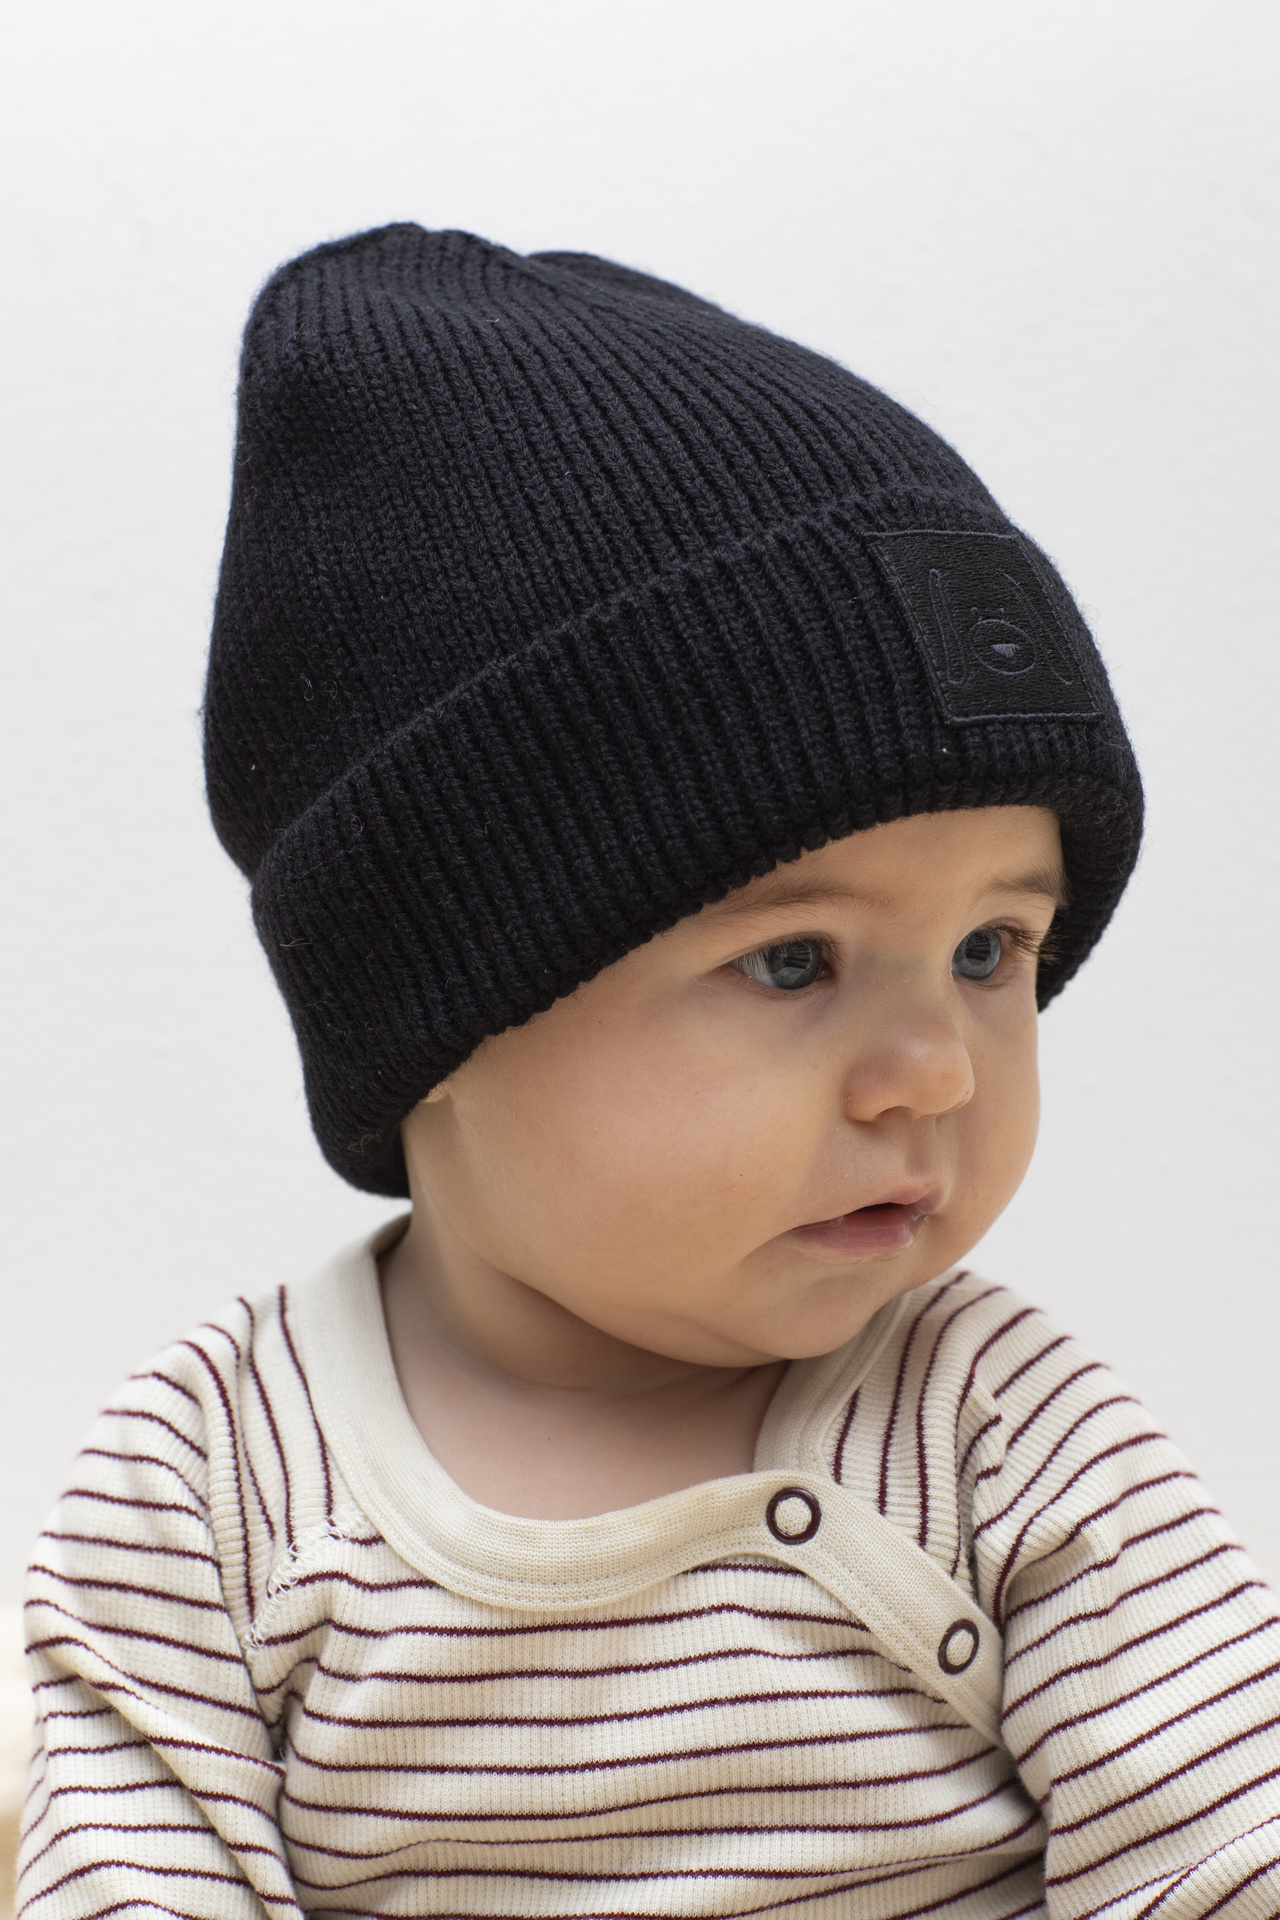 Knitted beanie patched Black 30 2-6 Y